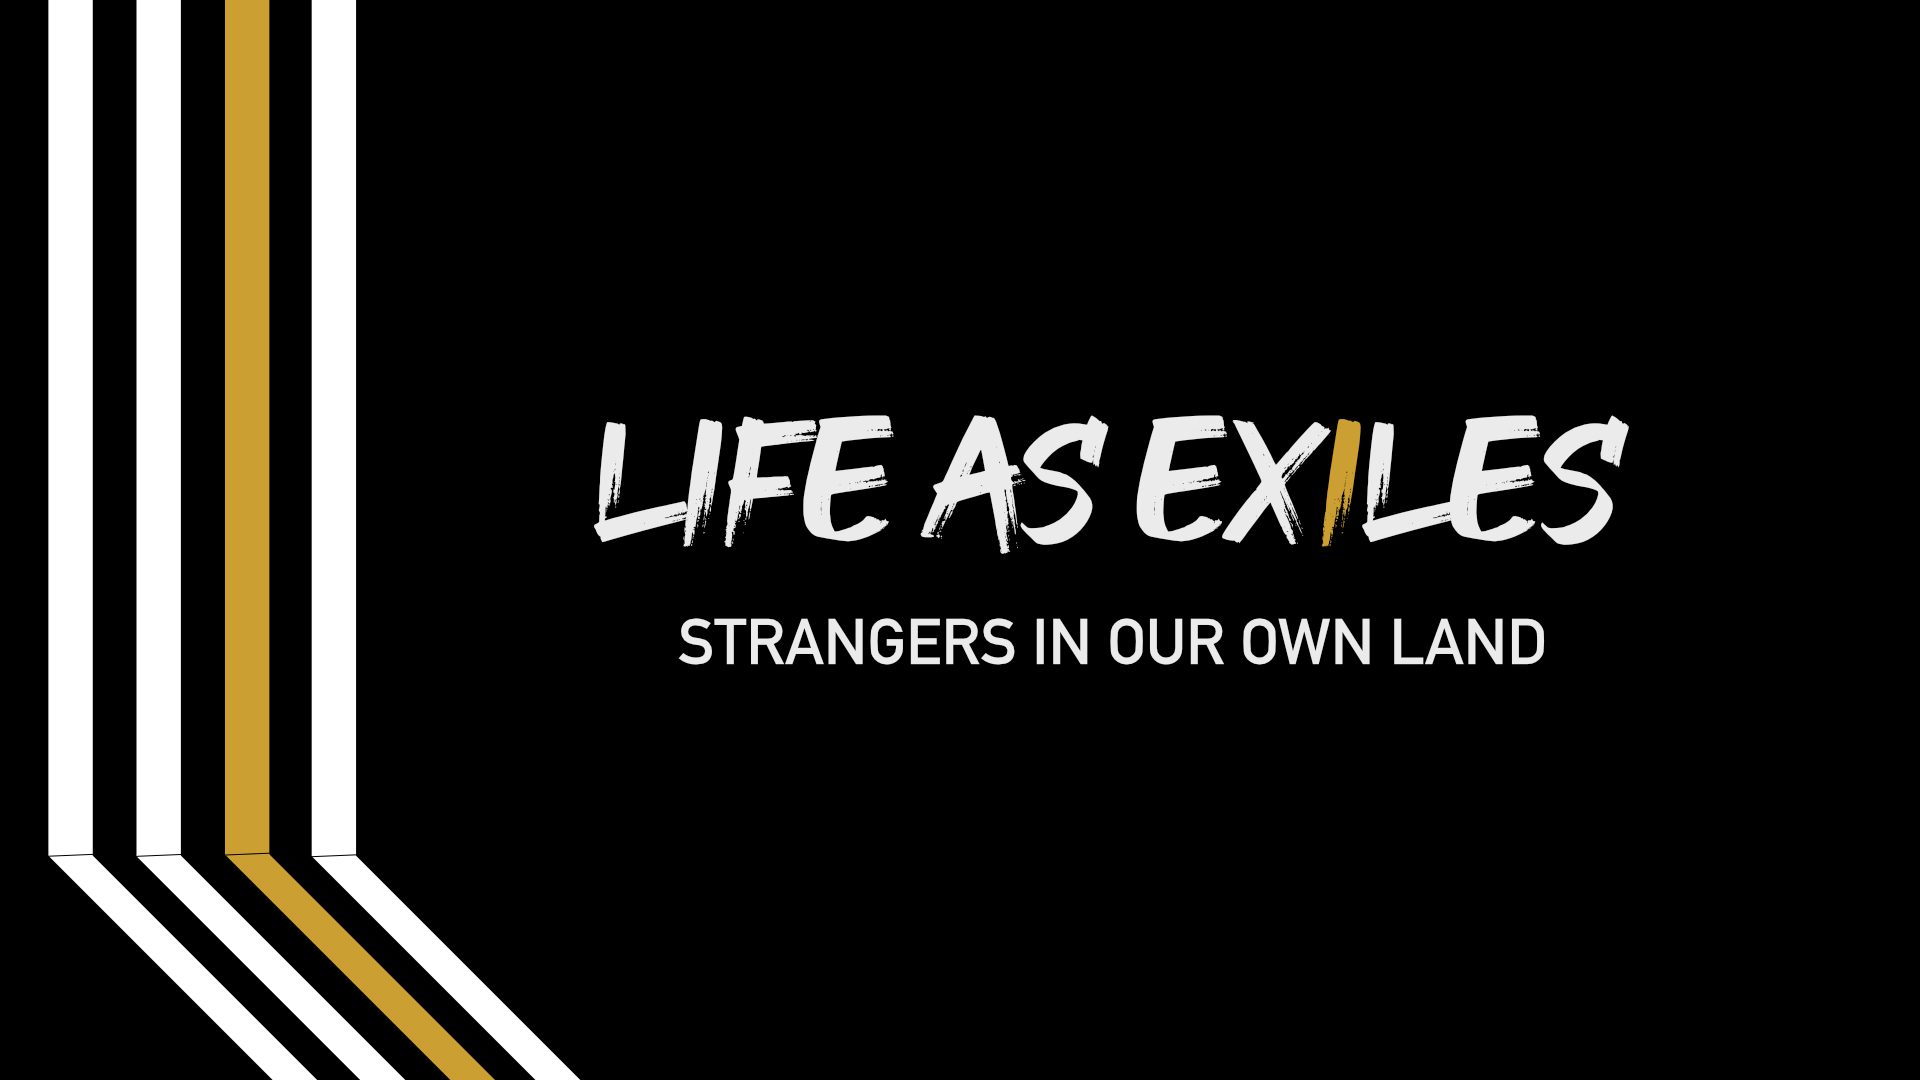 Life as Exiles – Part 2